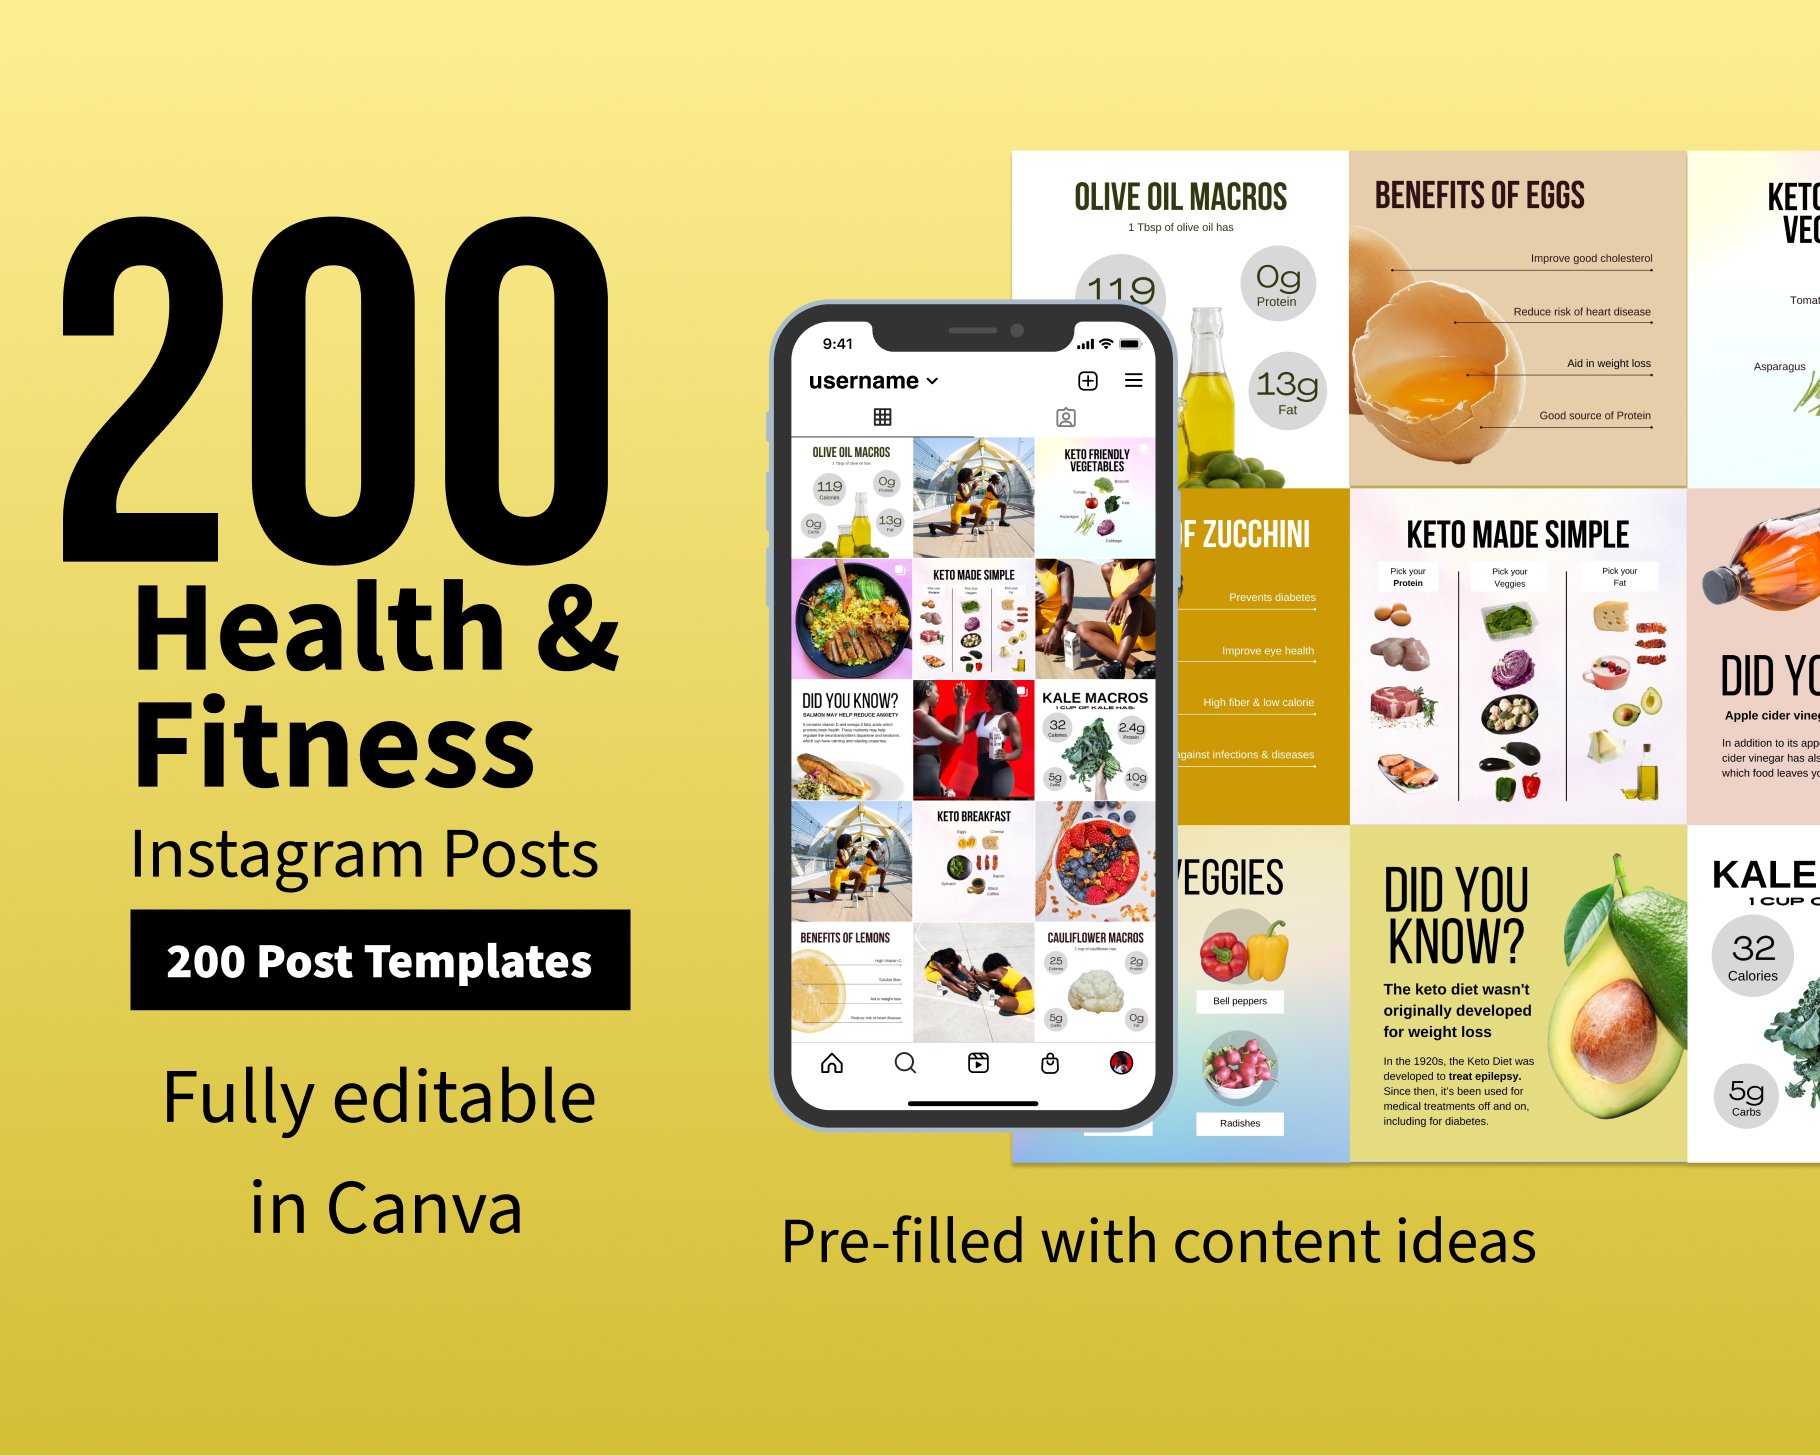 200 Health & Fitness IG templates cover image.